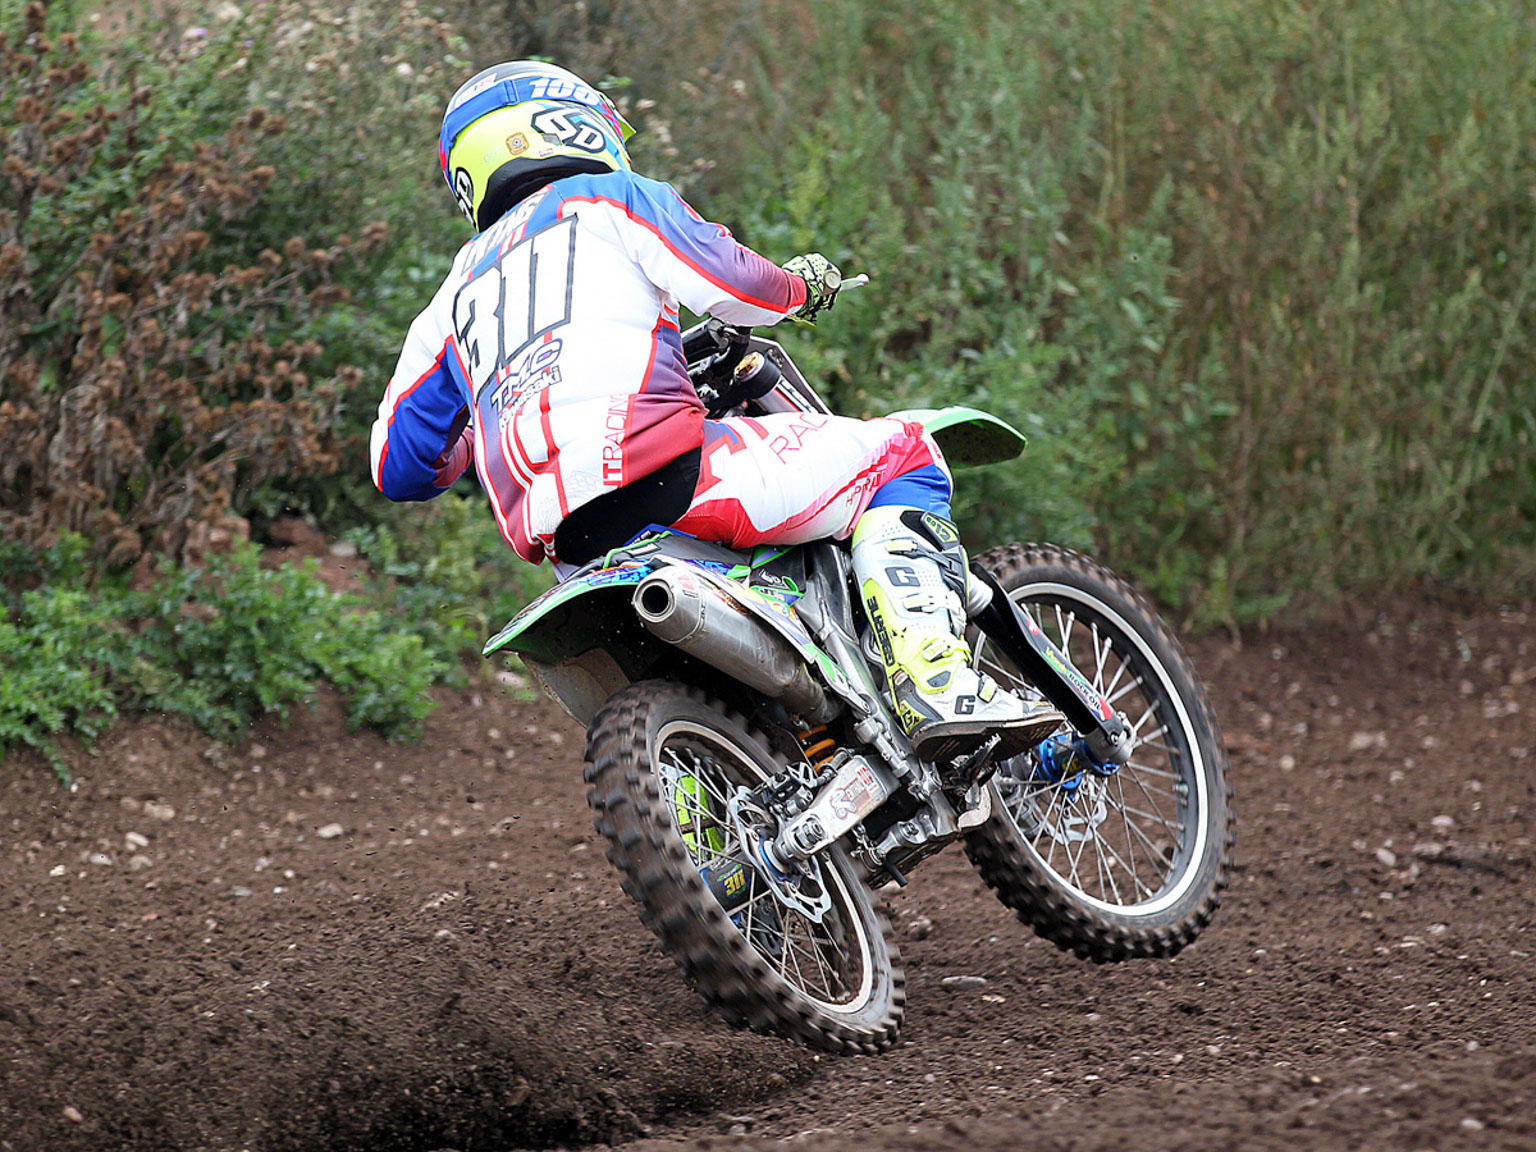 Lewis King, 3rd in MX2